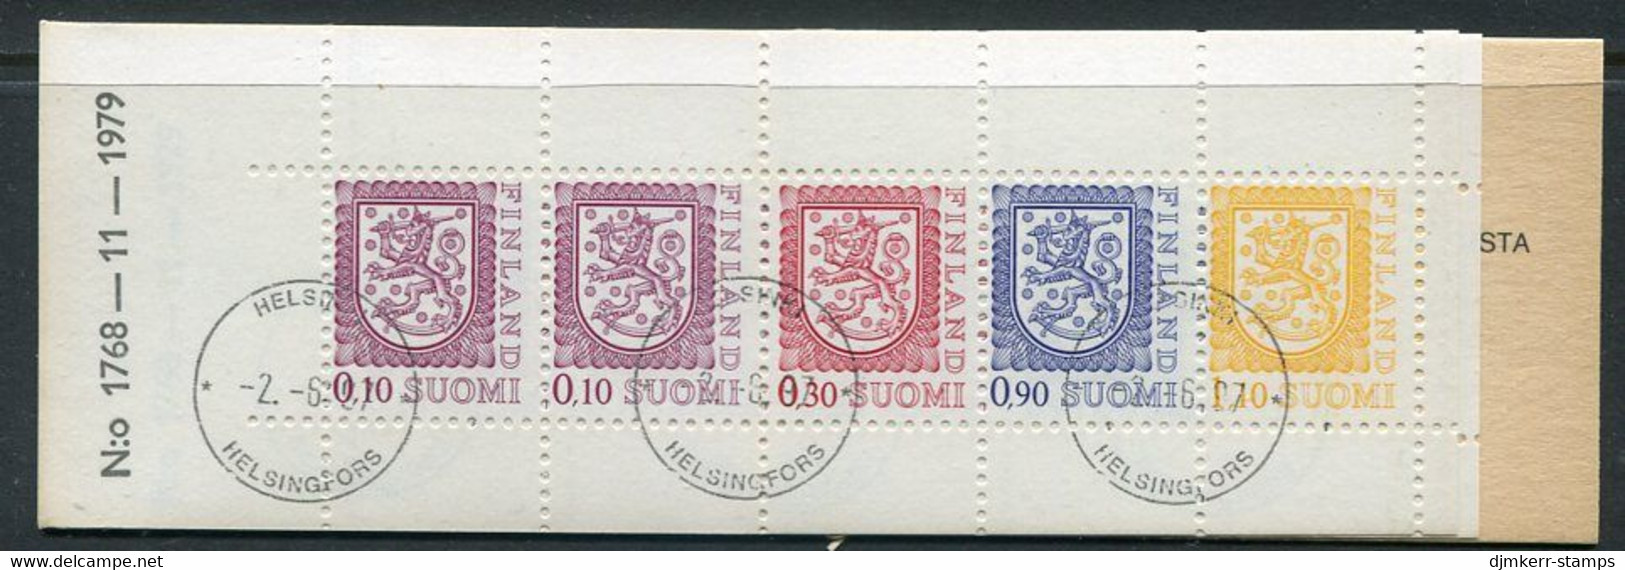 FINLAND 1980 Lion Definitive Type I 5 Mk. Complete Booklet Cancelled.  Michel MH 12 I - Cuadernillos